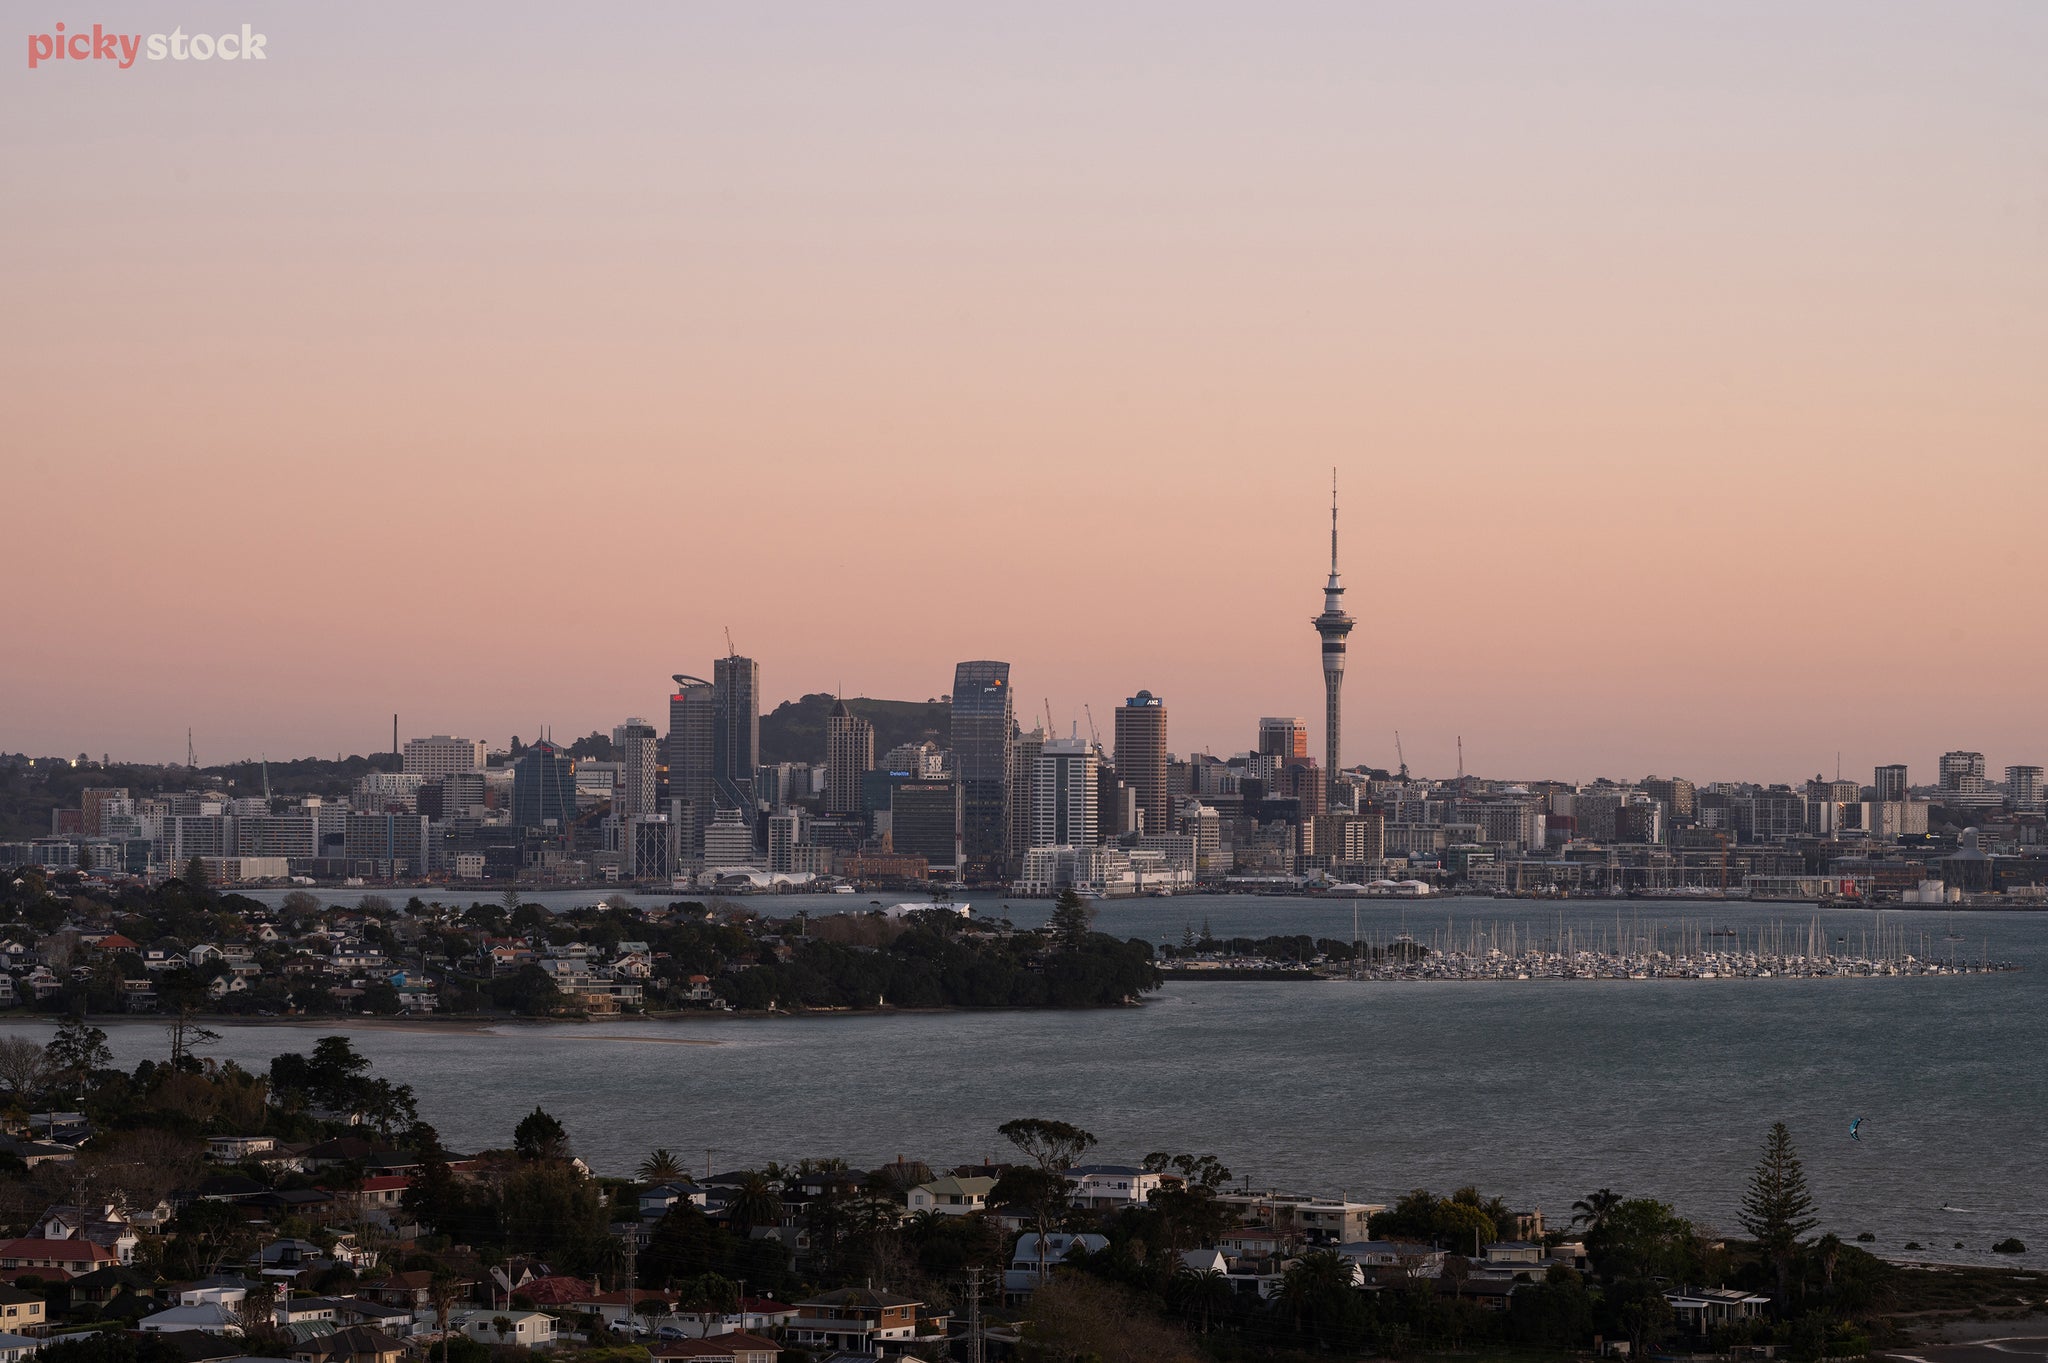 City scape of Auckland City in the distance, sitting behind layers of hills and houses. A large cruise ship visible in the port. 